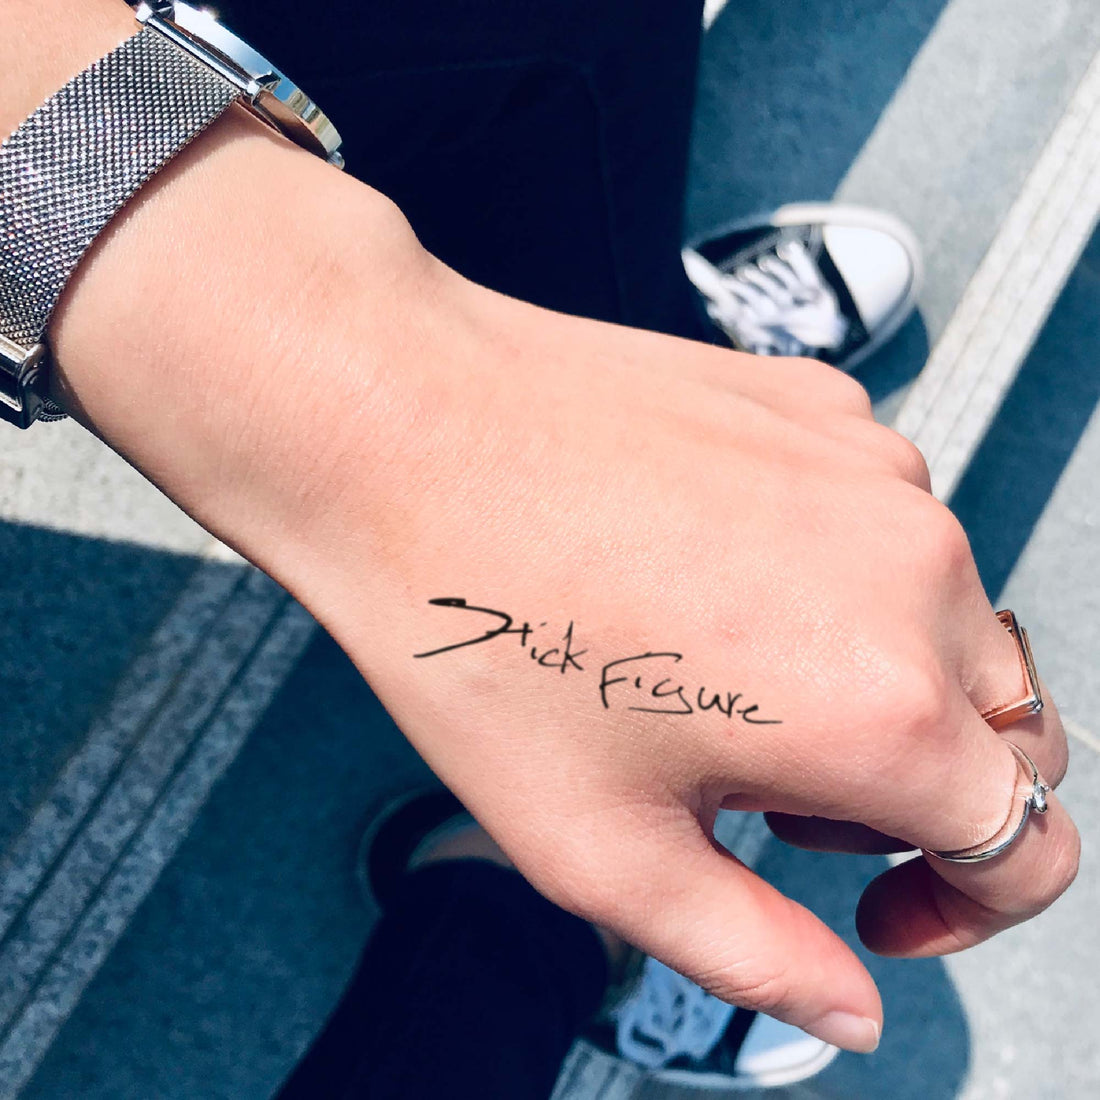 Stick Figure custom temporary tattoo sticker design idea inspiration meanings removal arm wrist hand words font name signature calligraphy lyrics tour concert outfits merch accessory gift souvenir costumes wear dress up code